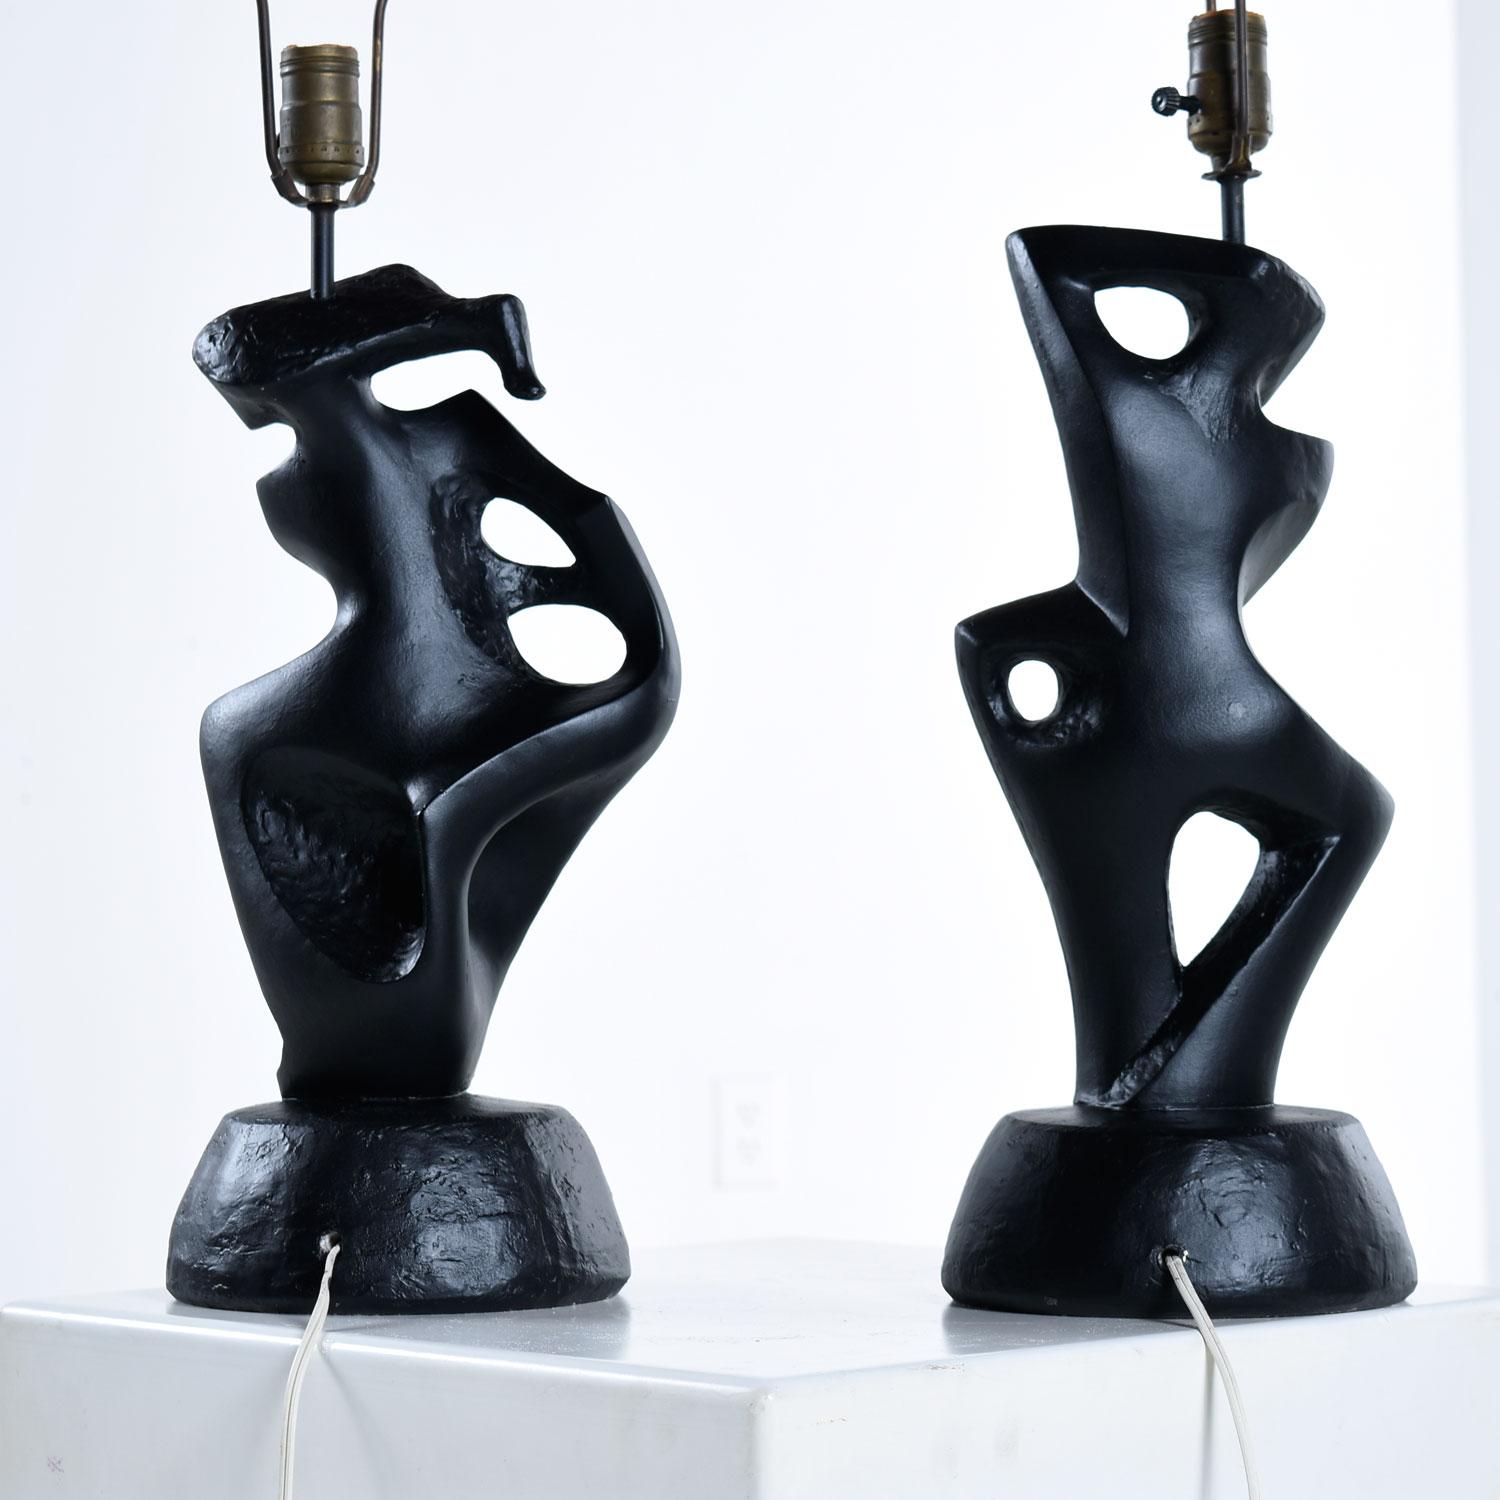 These hard to find abstract figural table lamps are made by RIMA, NY, circa 1950s.

Cubist masculine and feminine mirrored dancing forms frozen in time. Professionally repainted to match the original color and matte finish. Restored to excellent